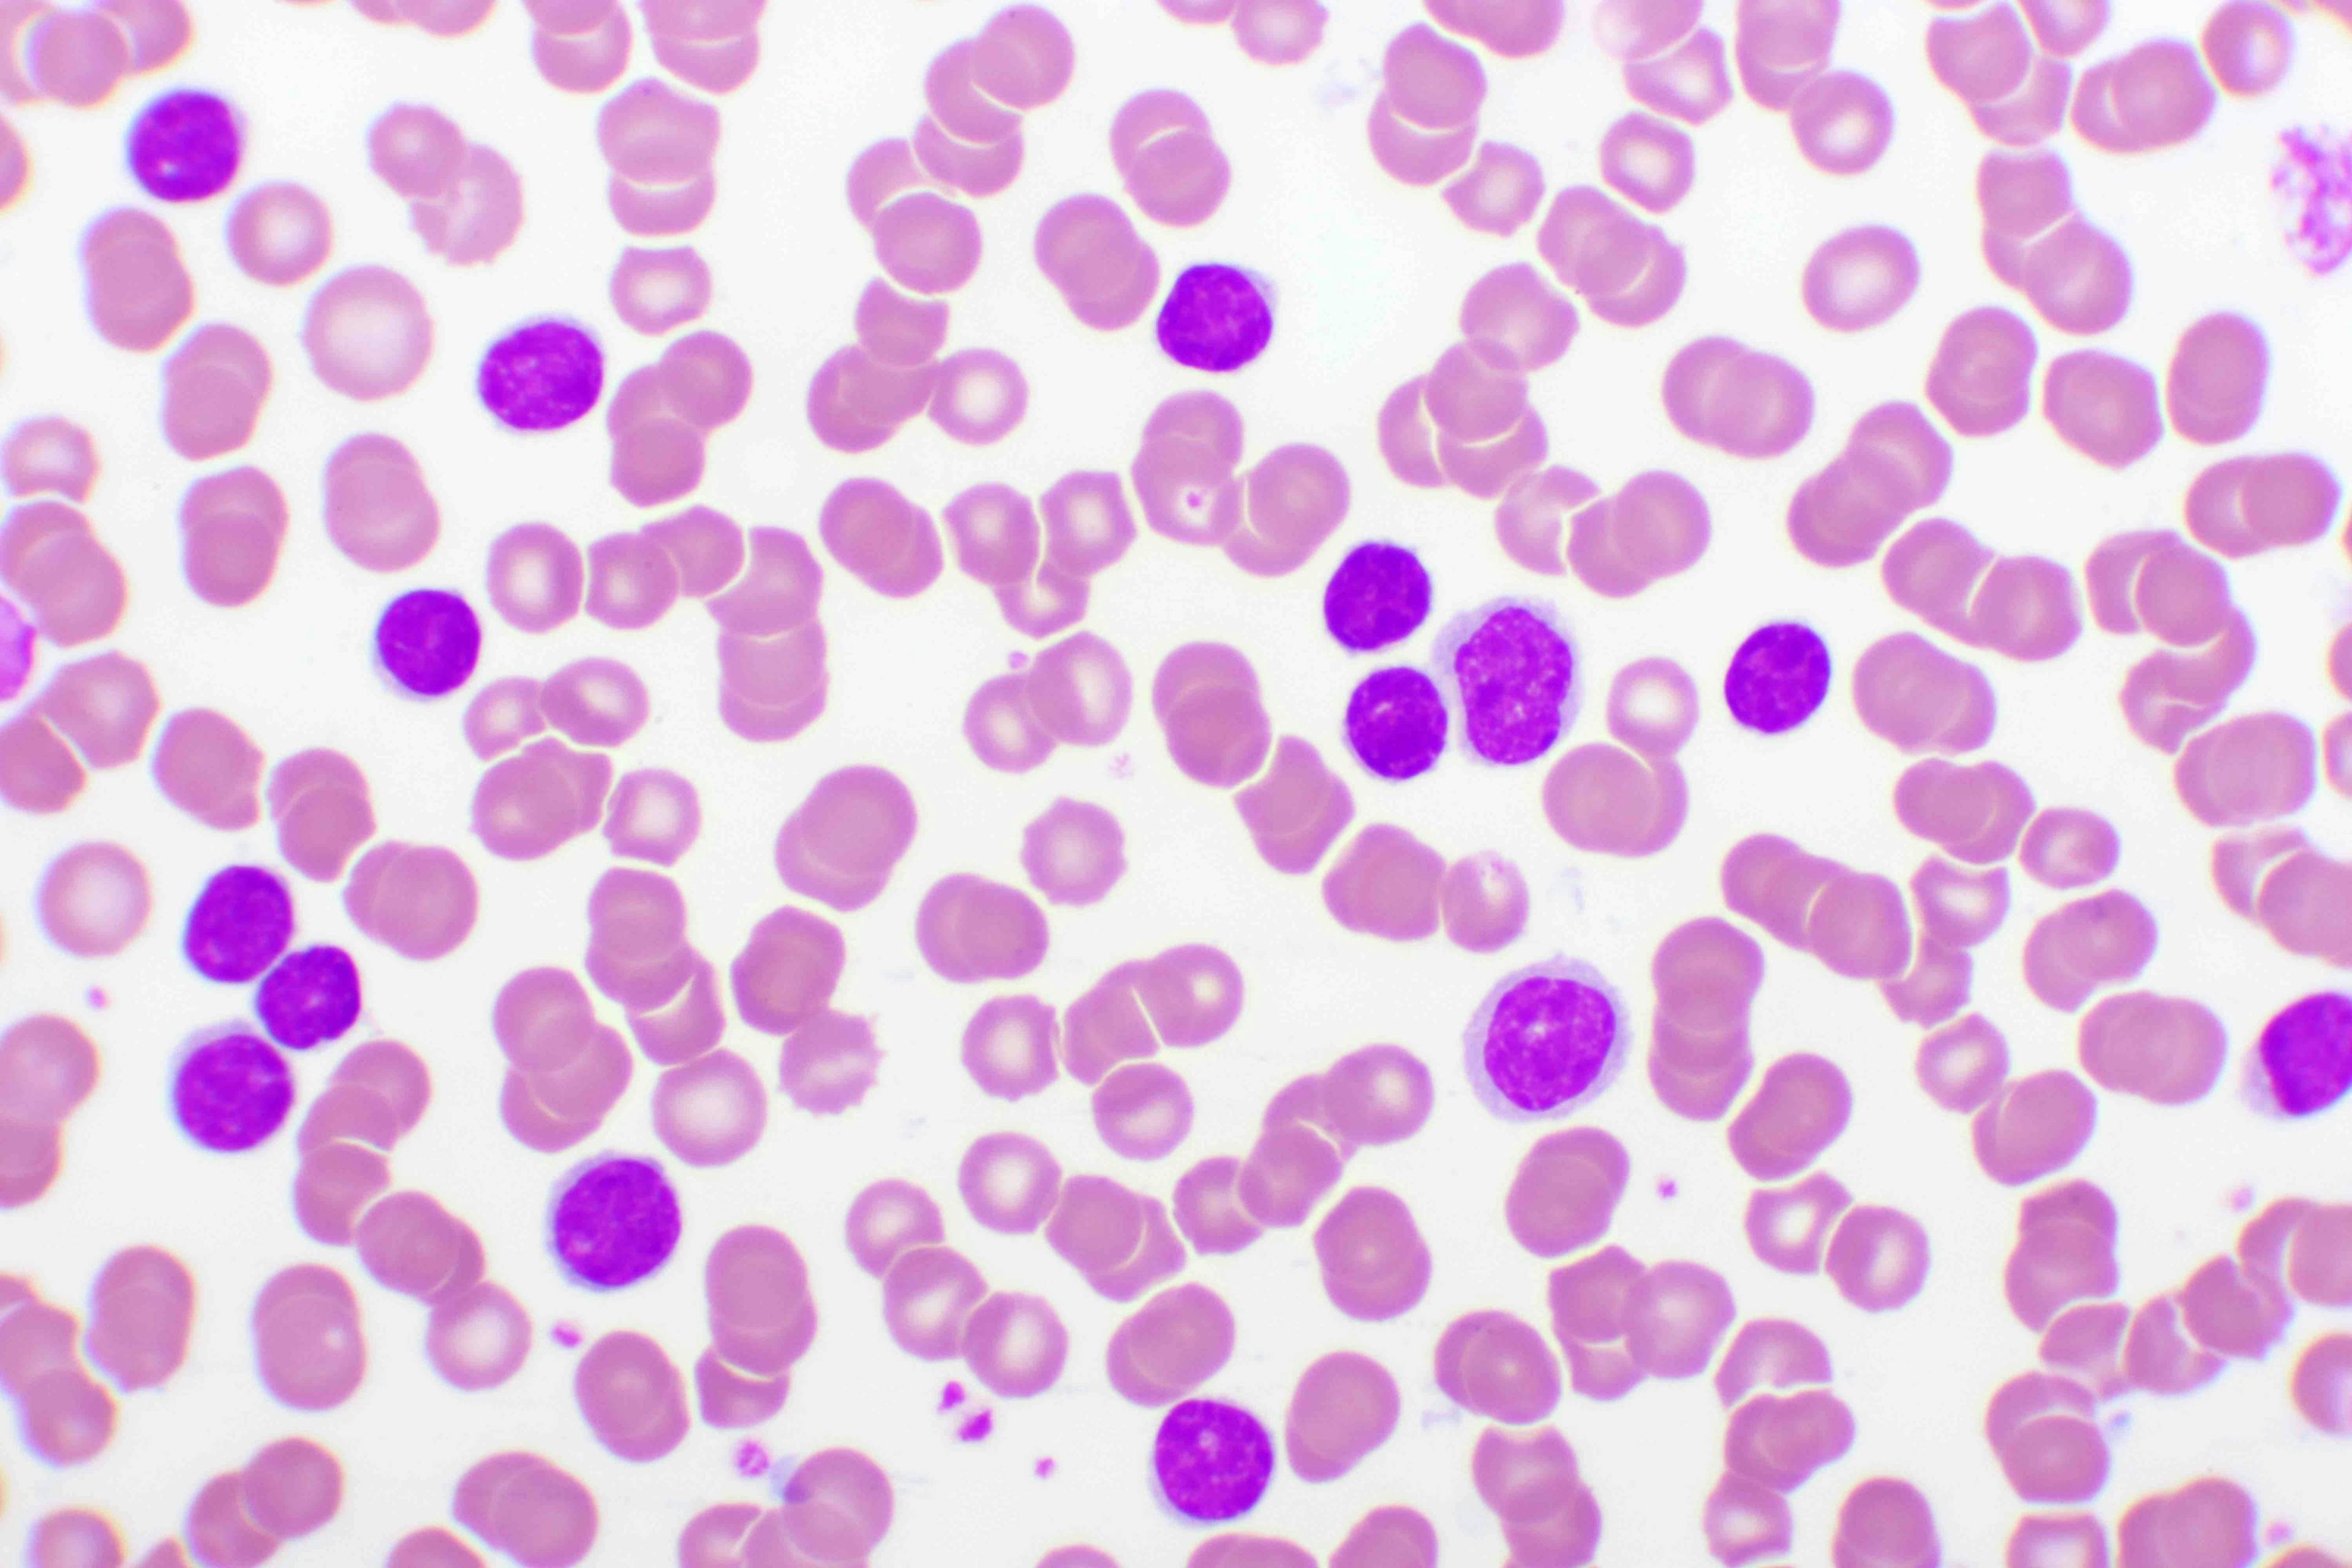 Experts Outline Best Practices in the Treatment of Chronic Lymphocytic Leukemia